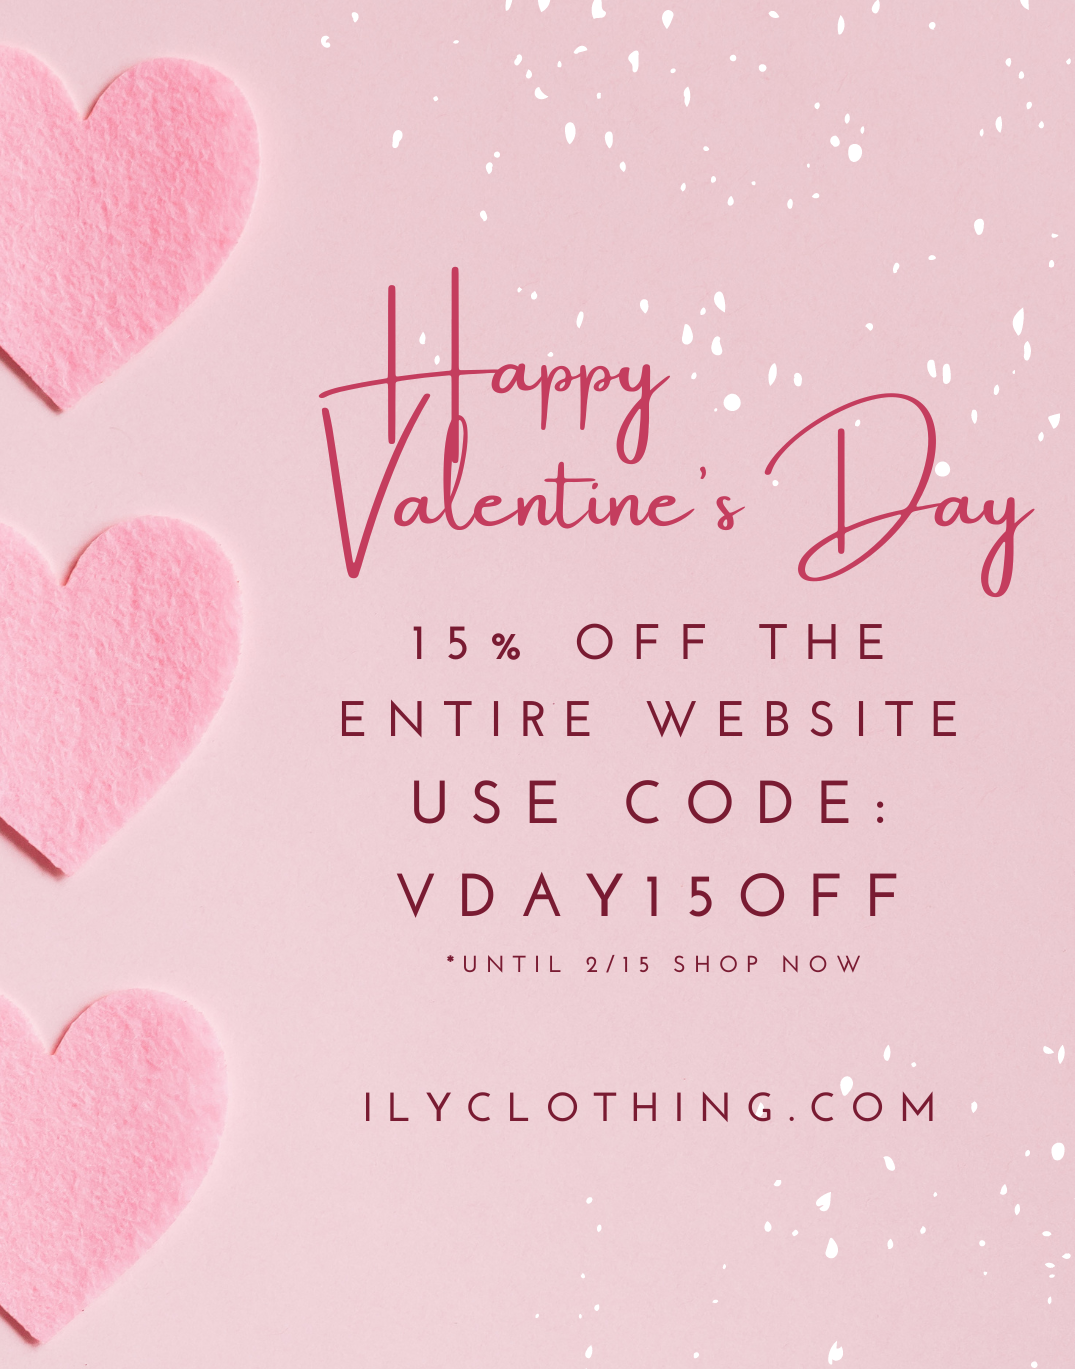 Embrace Your Confidence This Valentine's Day with ILY Clothing's Shapewear Sale!